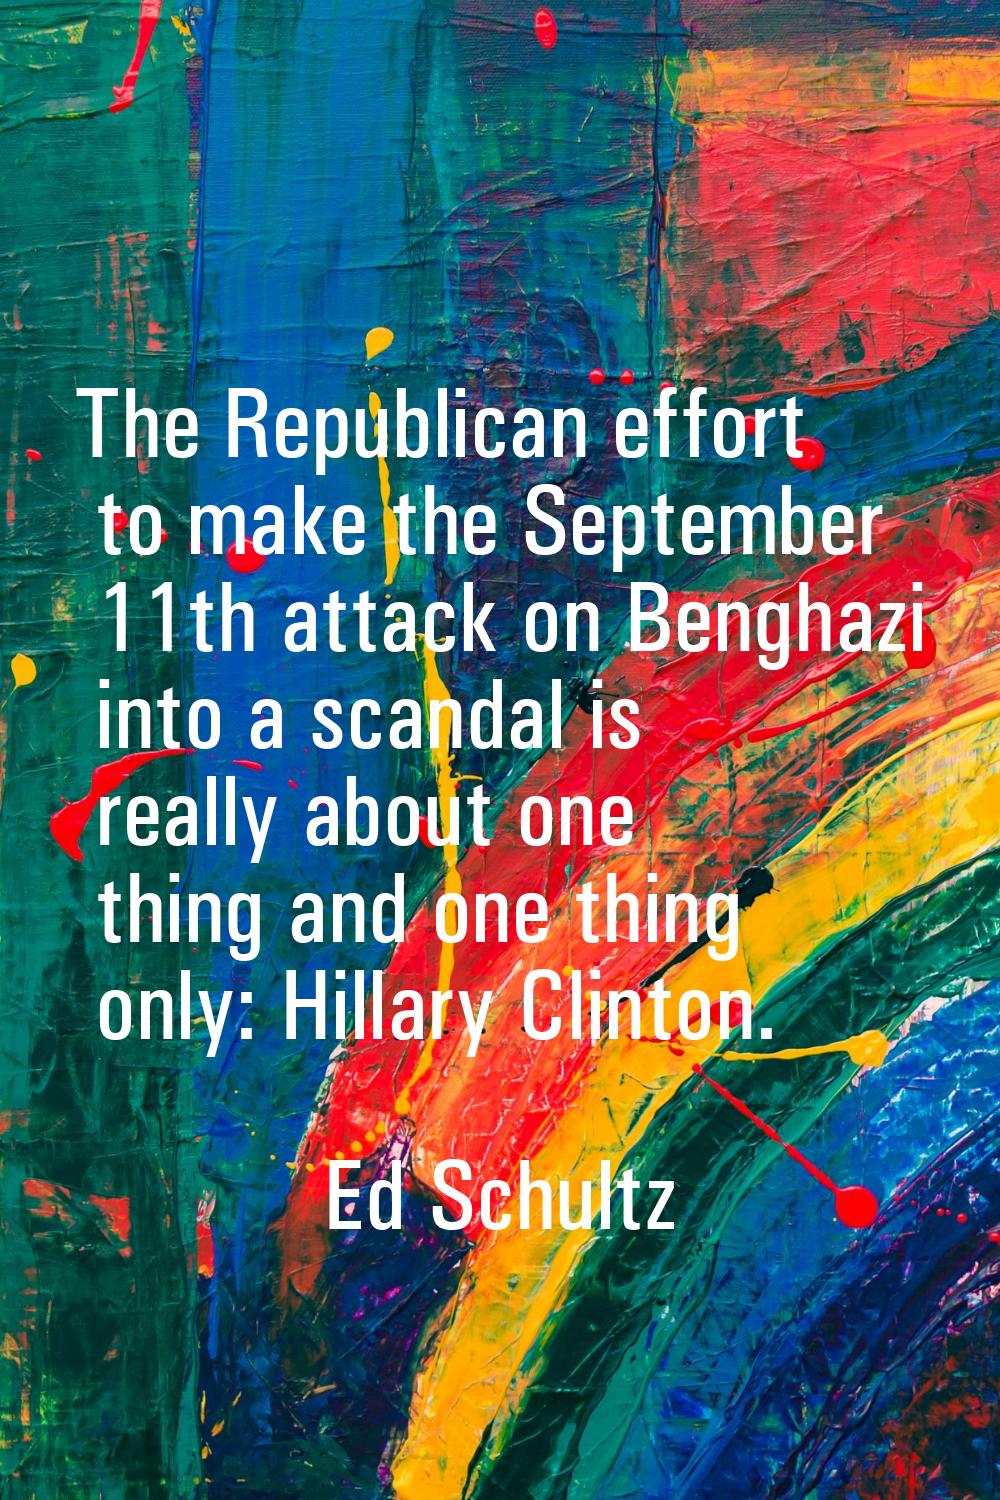 The Republican effort to make the September 11th attack on Benghazi into a scandal is really about 